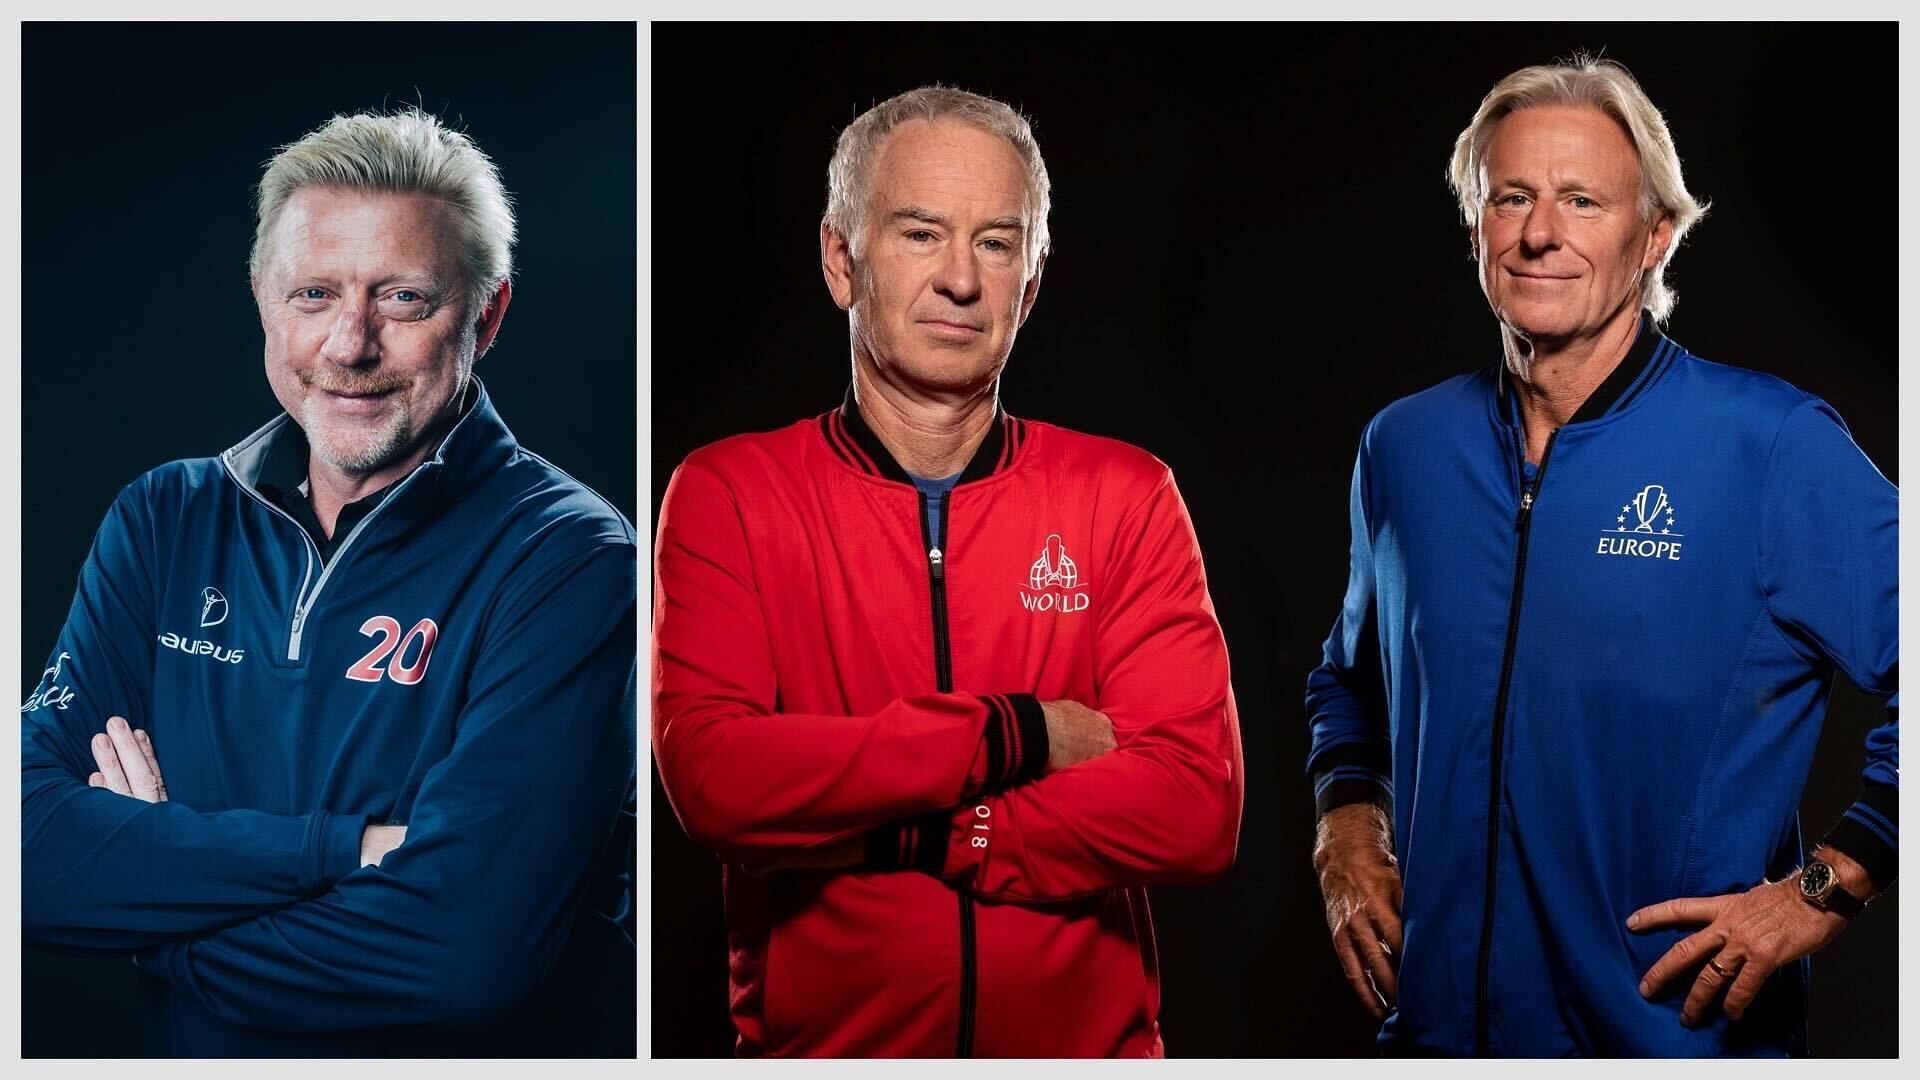 Boris Becker delighted by John McEnroe and Bjorn Borg reigniting their rivalry